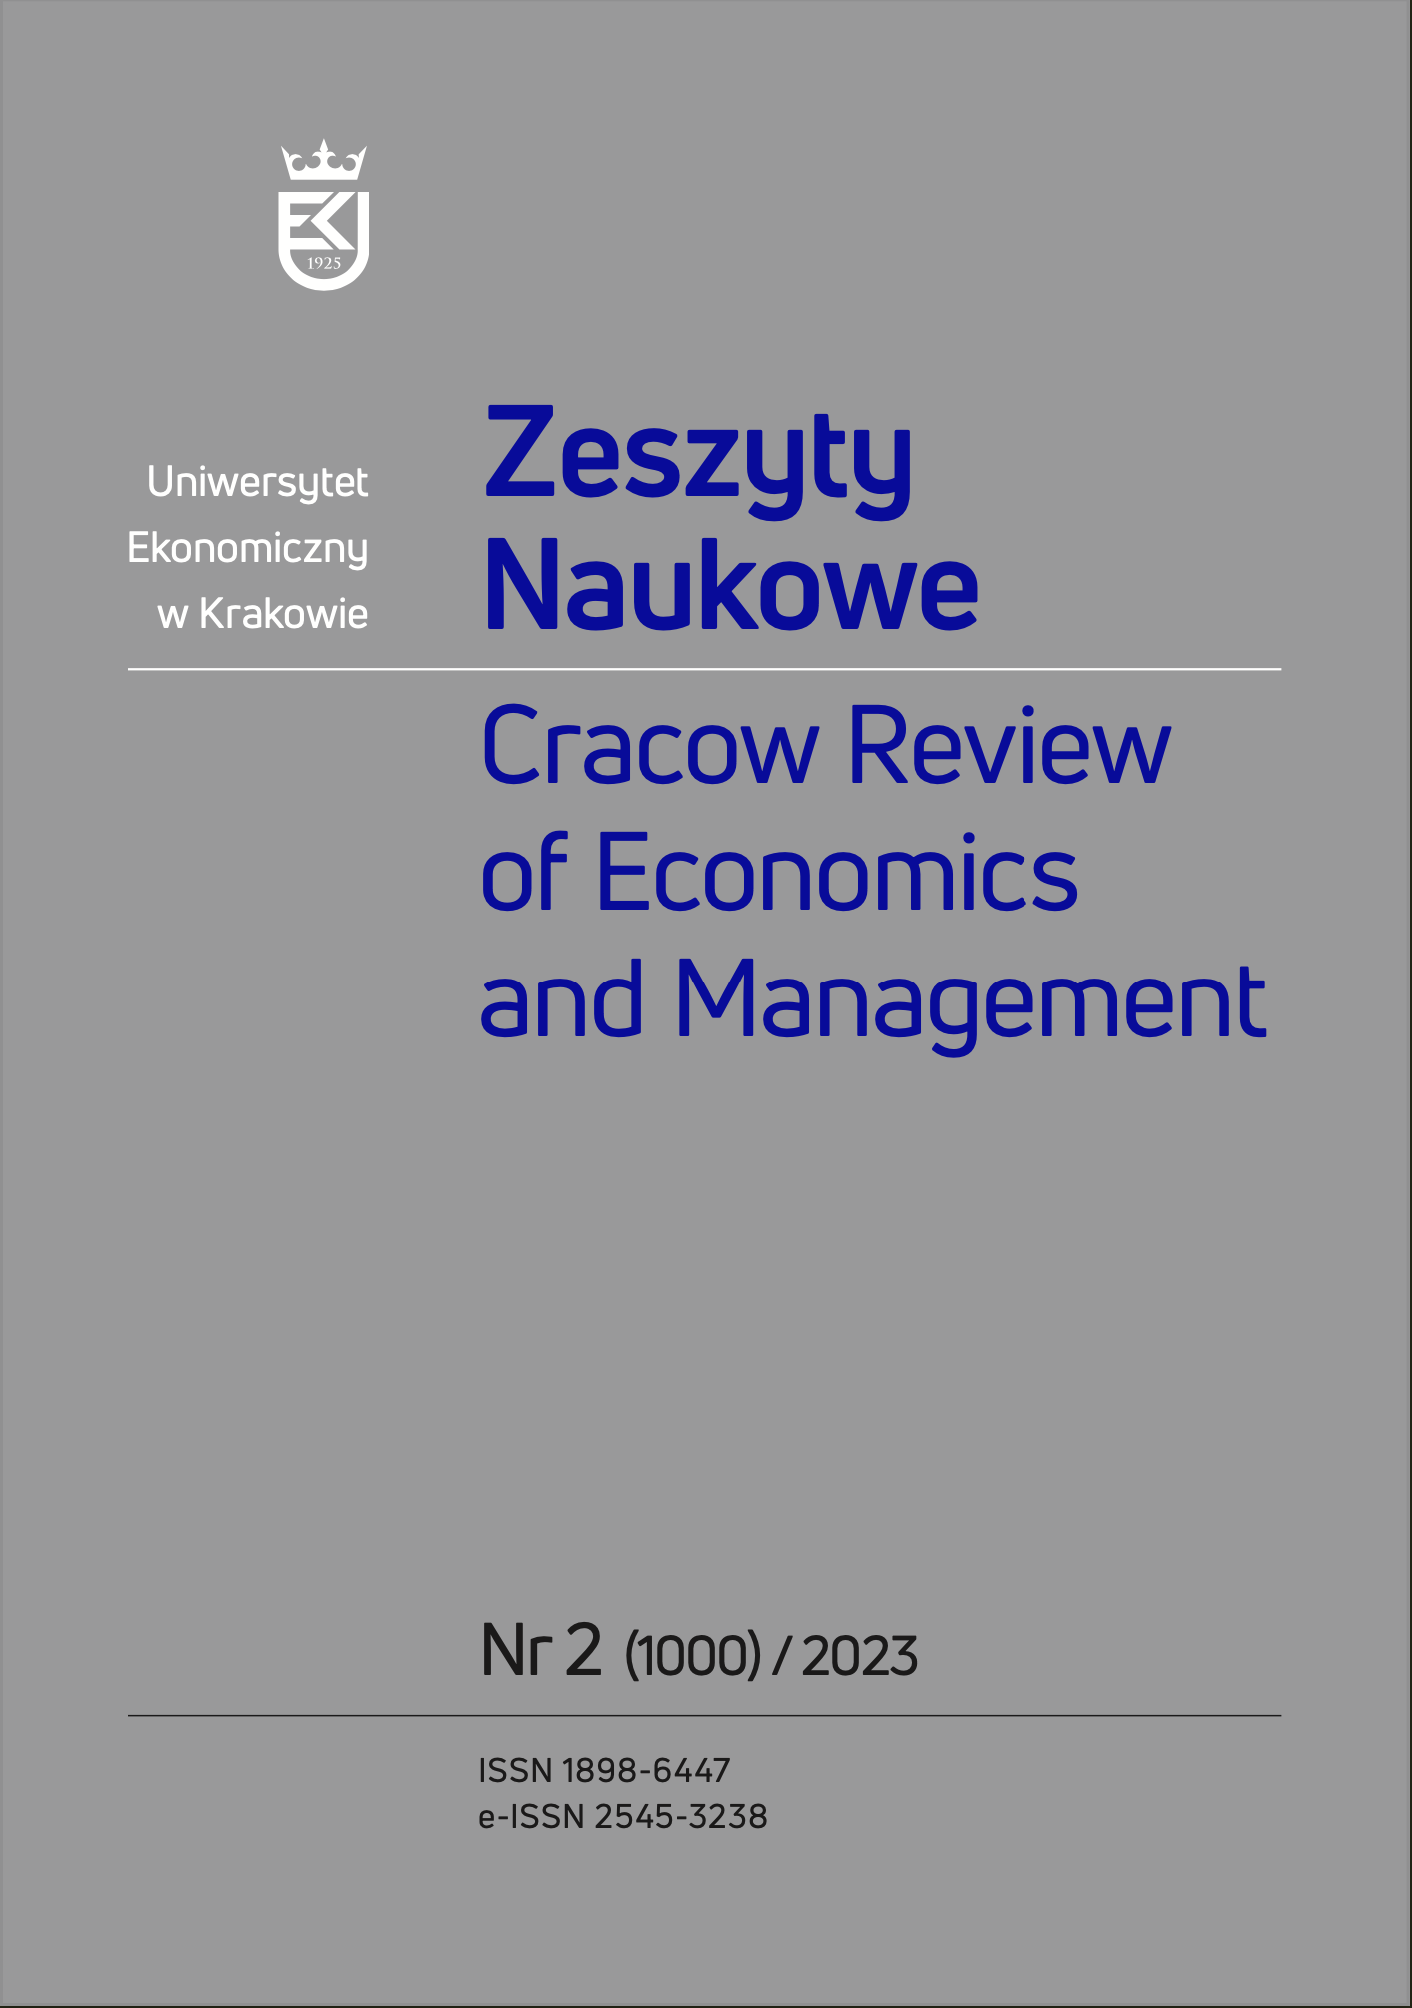 An Estimation of the Efficiency
of Public Research Institutes
in Poland: The DEA Approach